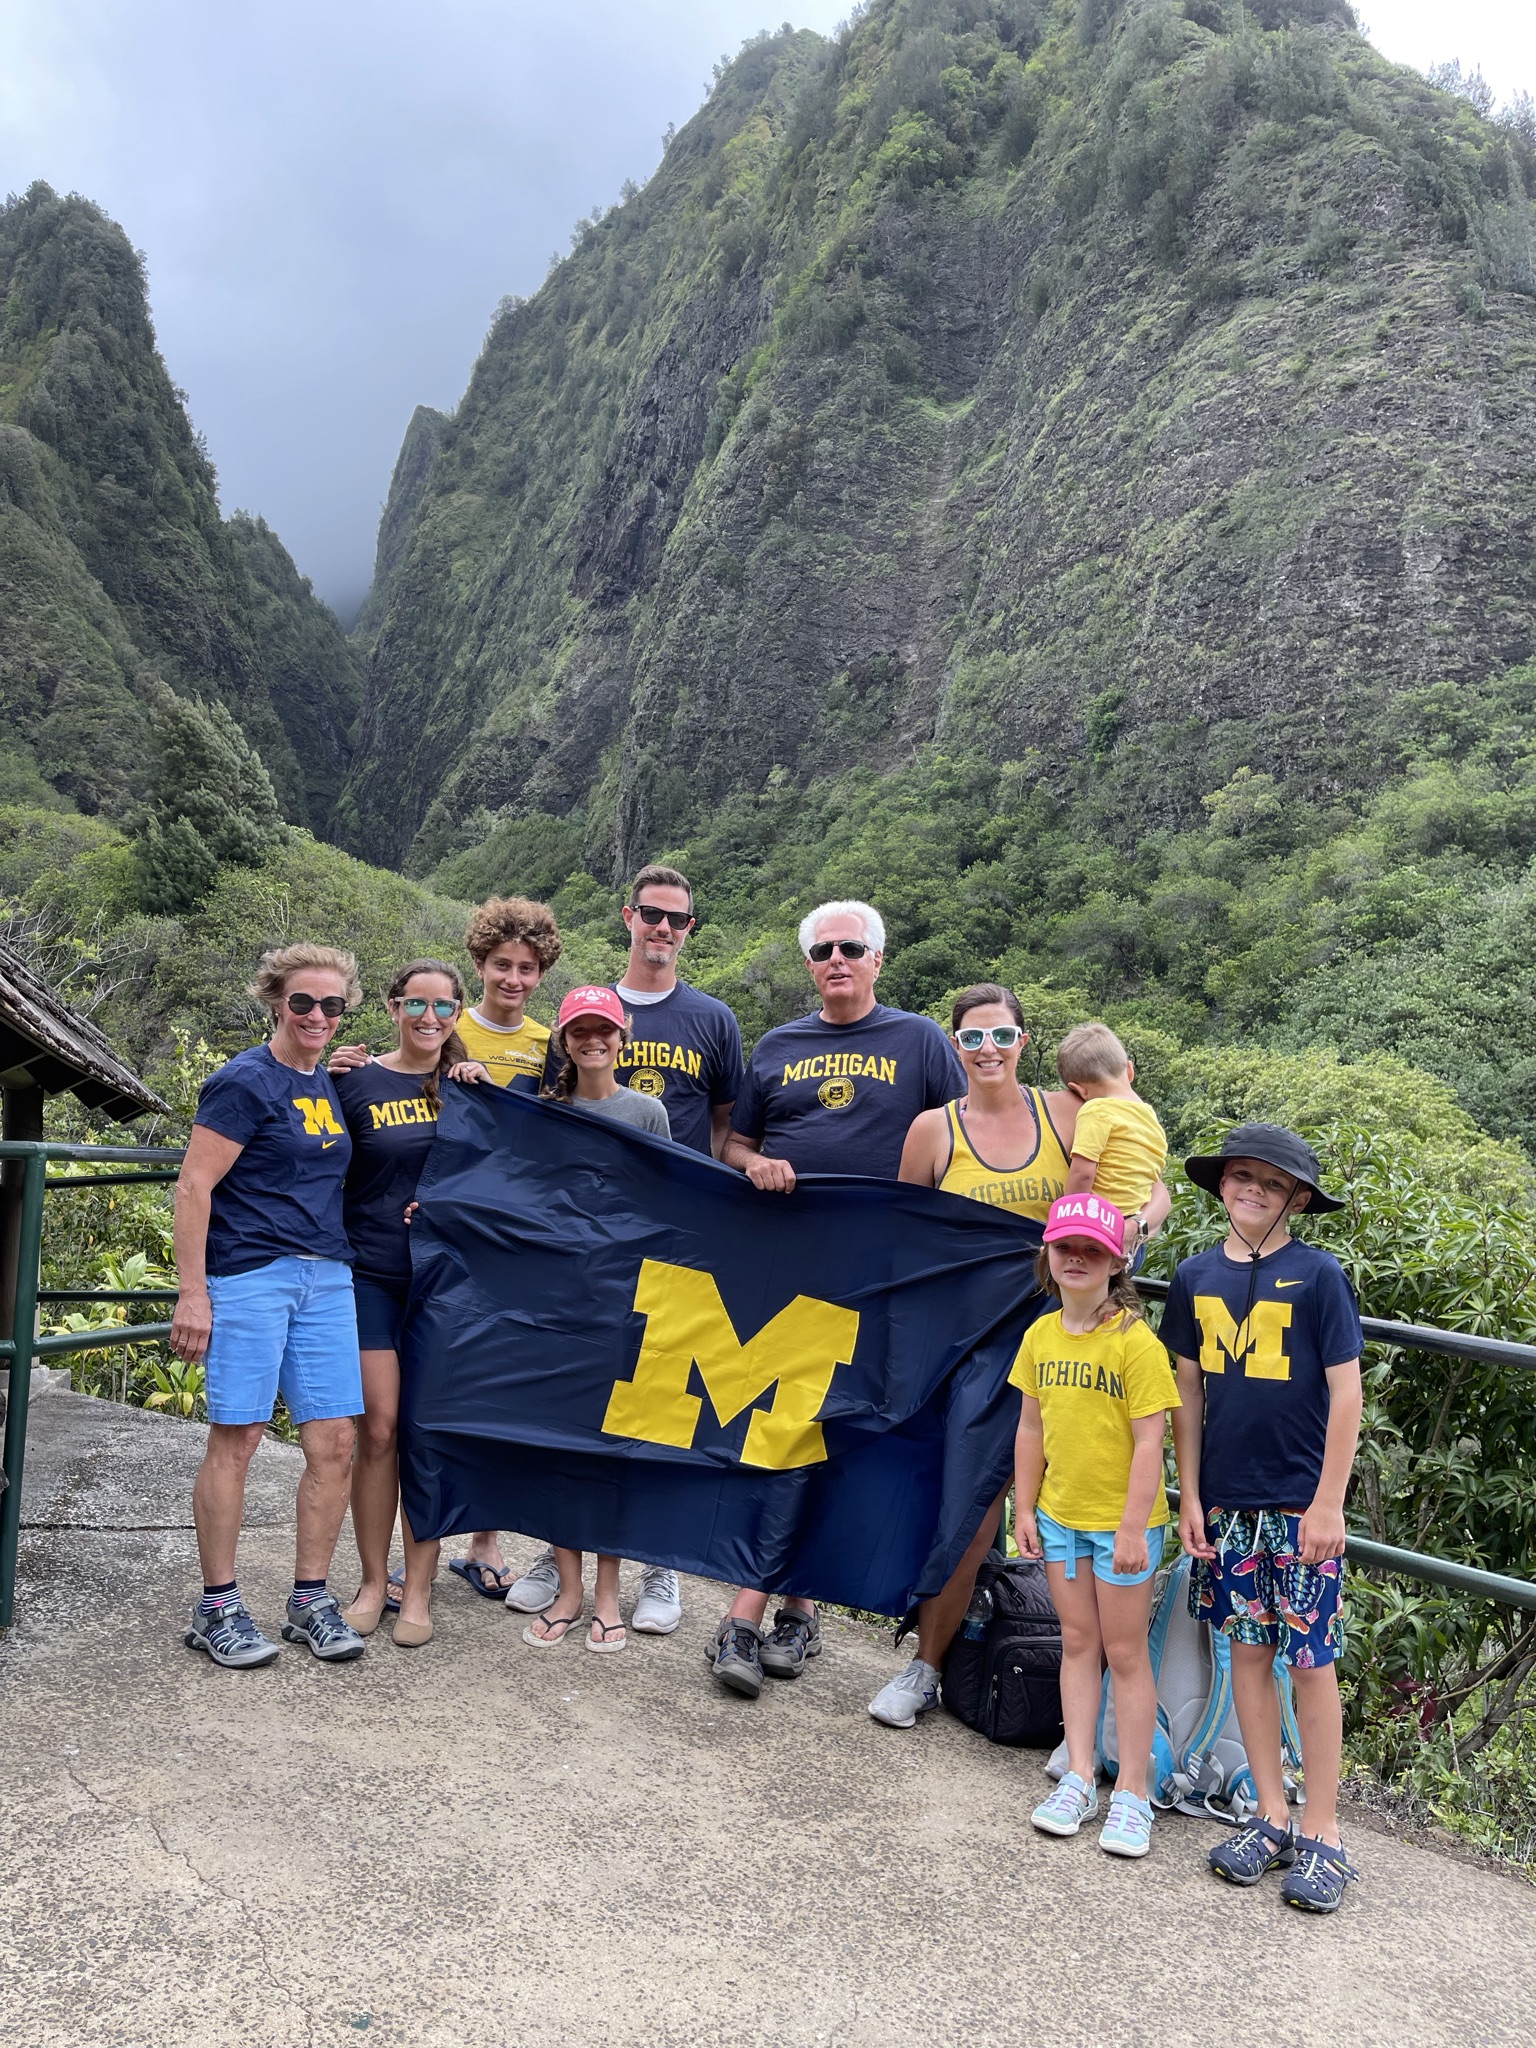 After meeting during their freshman year at U-M, Tom Studenski, ’79, and Diane Harnica-Studenski, ’81, celebrated 40 years of marriage by visiting the Io Valley State Monument in Maui, Hawaii, with their children and grandchildren: Sindri, Alex, Isabella; siblings Matt Studenski, ’05, MSE’06 and Jackie Studenski-Parker, ’07, DPT’10; and Jordan, Jillian, and Jay.